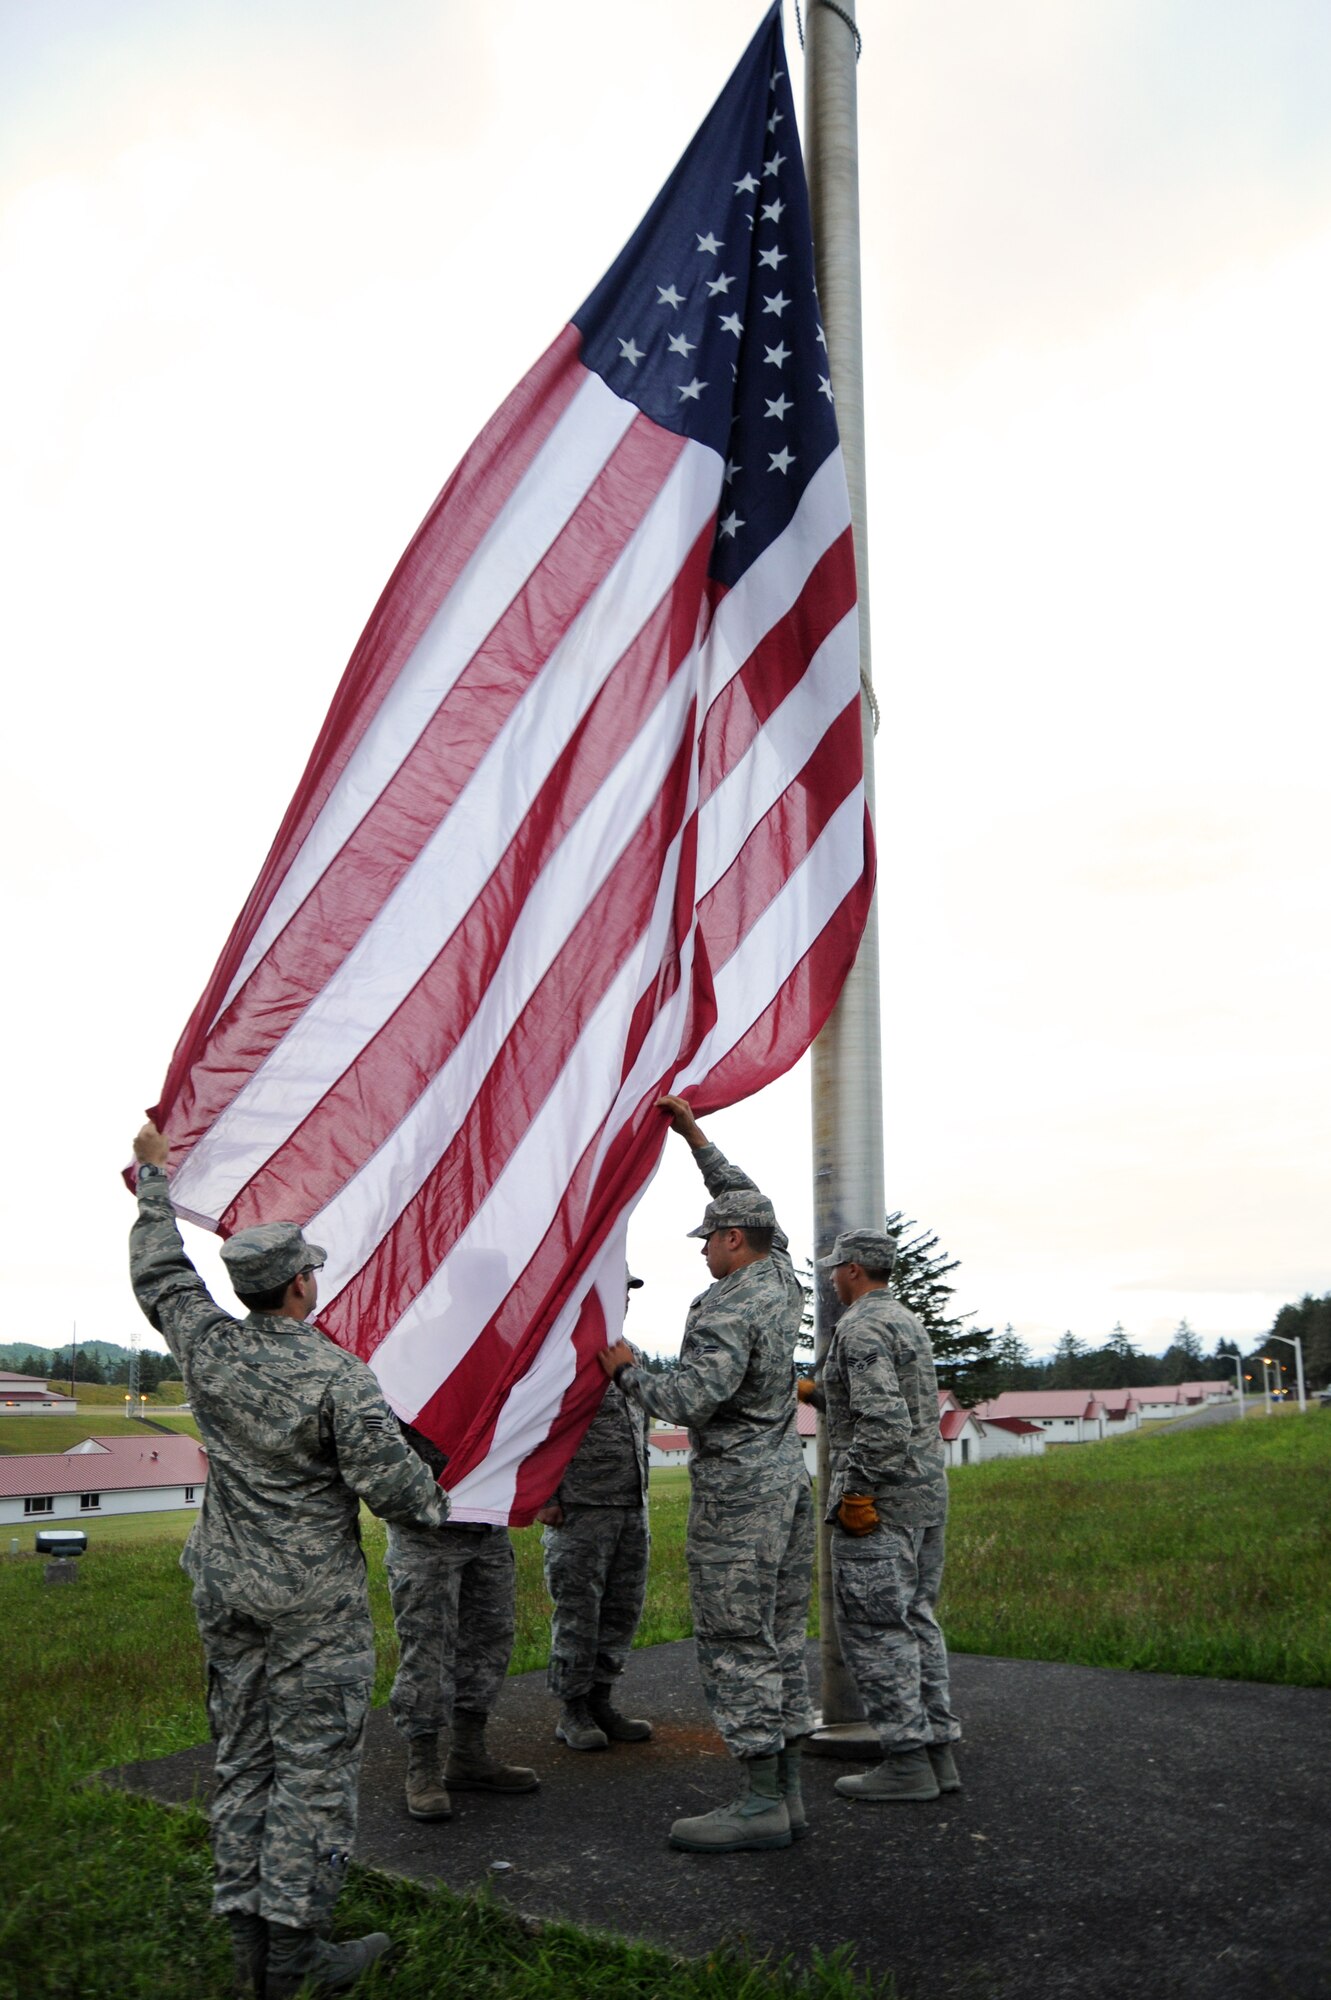 Airmen of the Combat Operations Group prepare to raise the colors during a morning reveille at Camp Rilea, Ore., June 21, 2013. (Air National Guard Photo by Tech. Sgt. John Hughel, 142nd Fighter Wing Public Affairs)